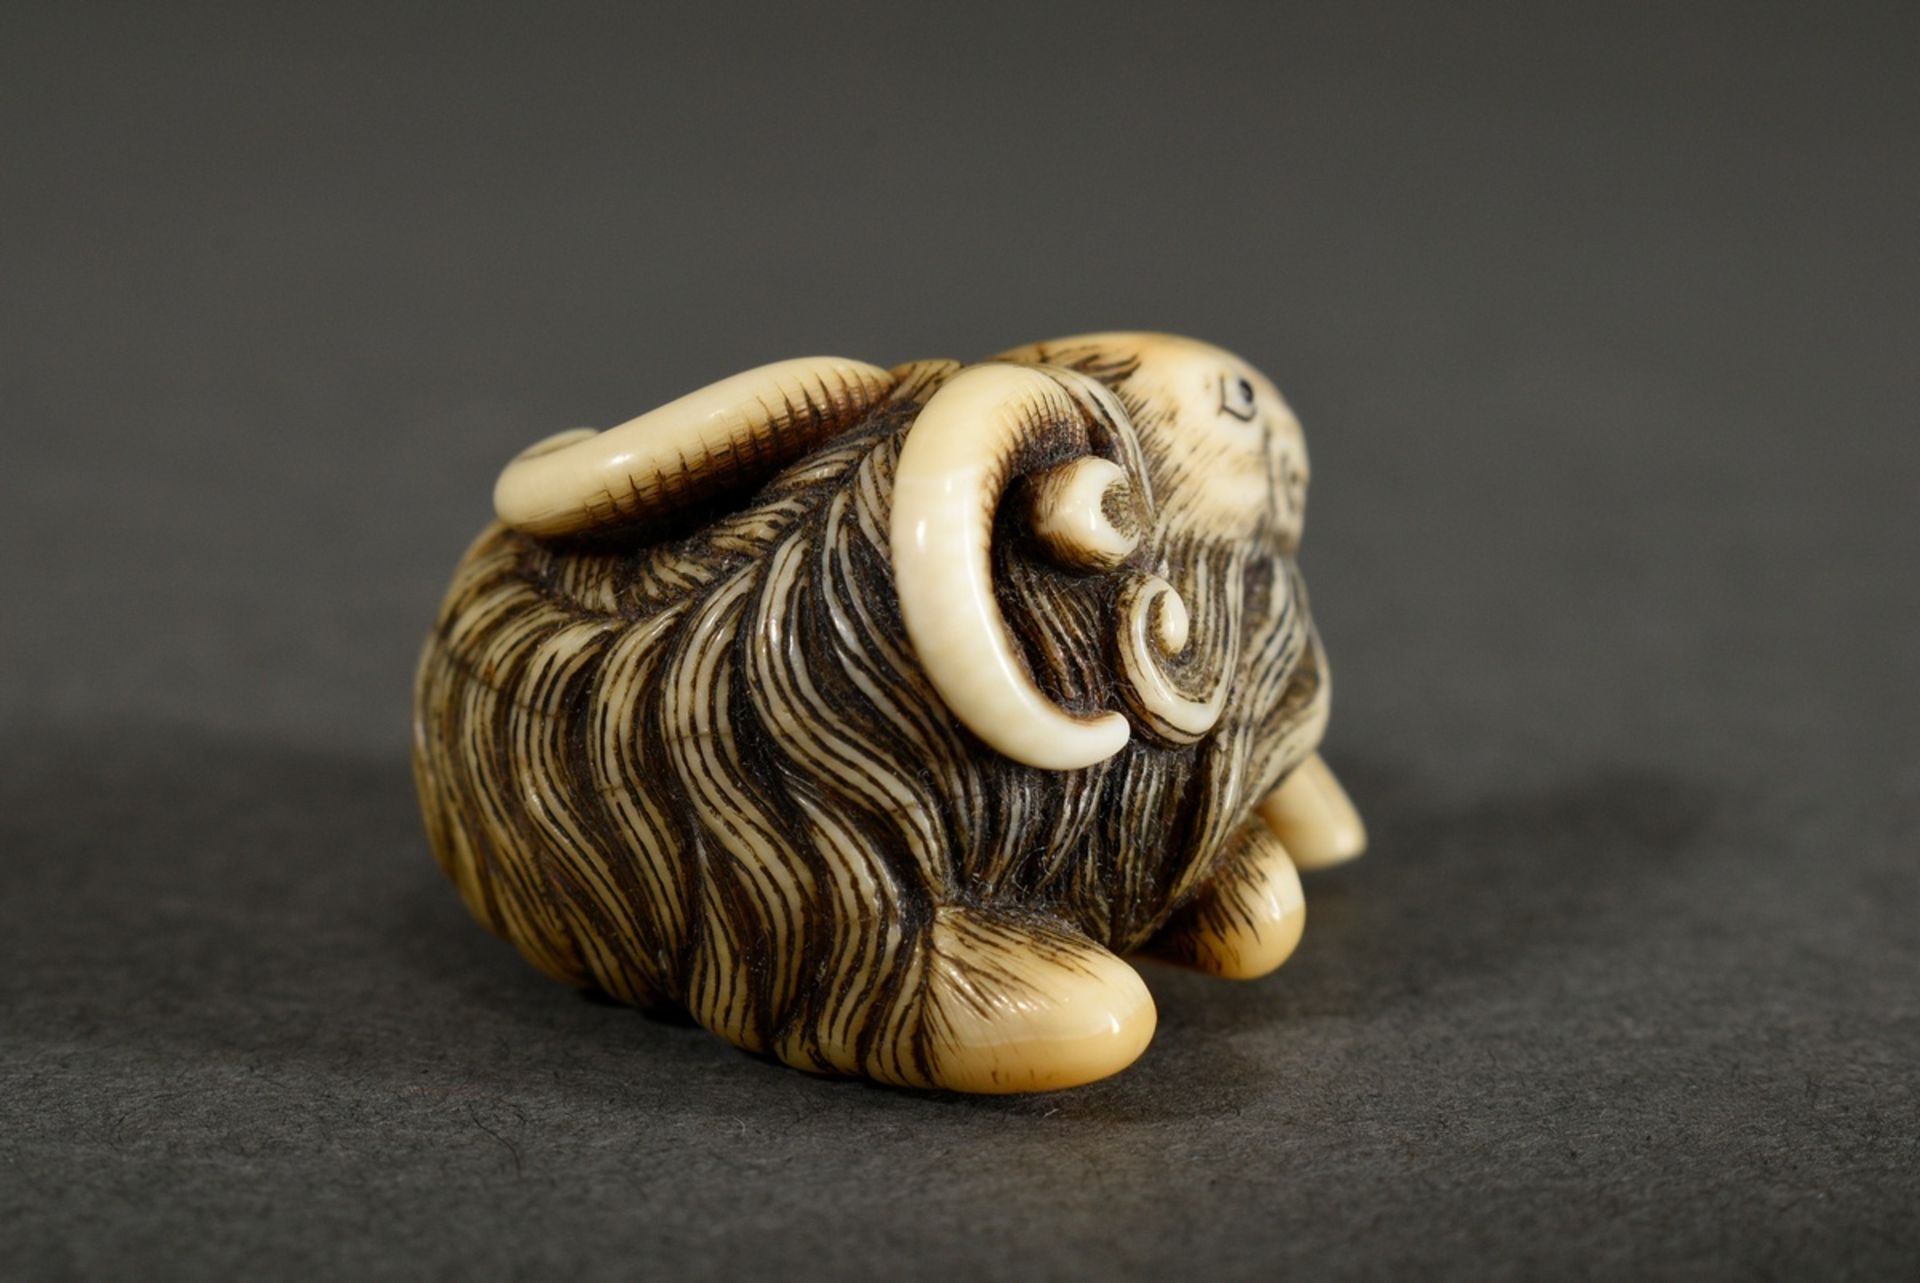 Ivory netsuke "Rolled-in mountain goat" with inlaid eyes of black horn and engraved fur, golden pat - Image 3 of 6